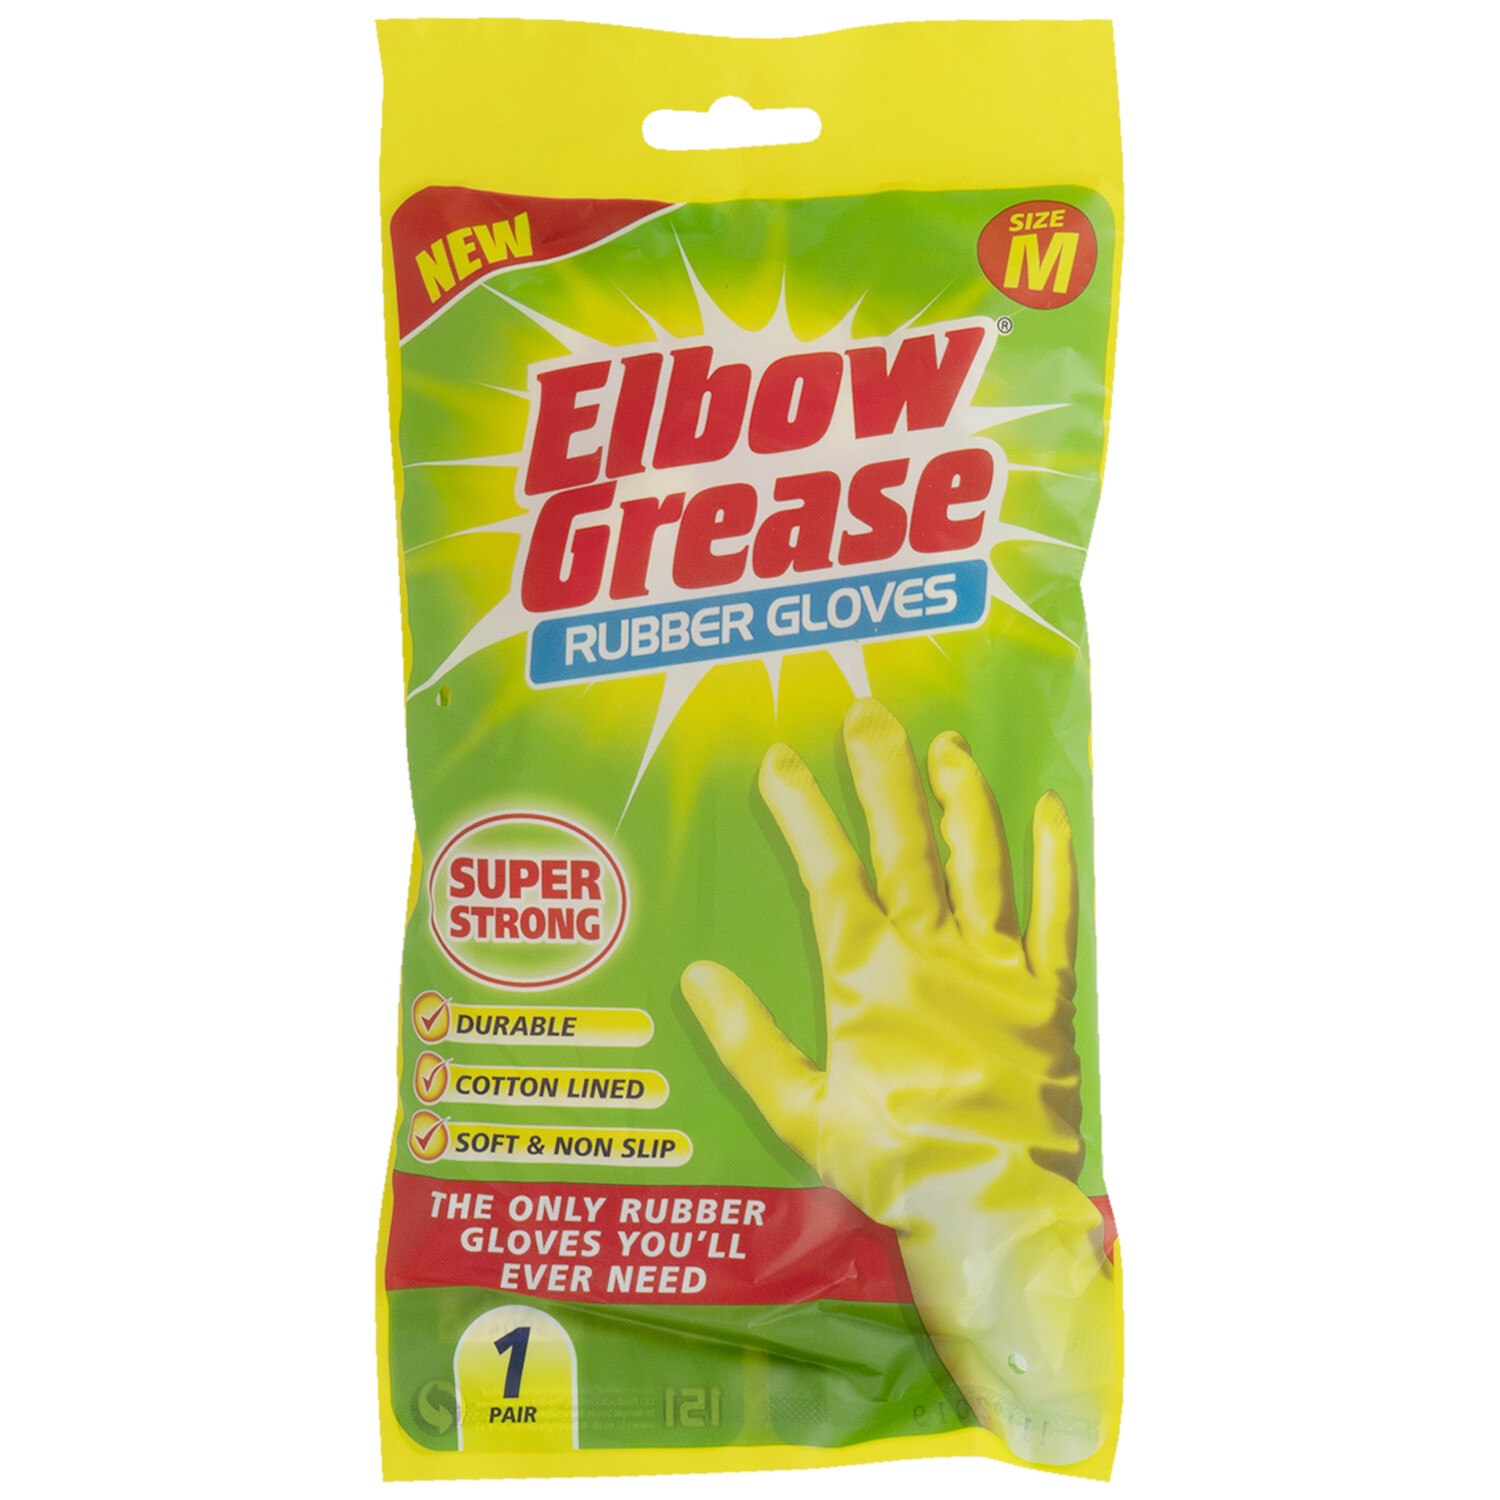 Elbow Grease Super Strong Medium Rubber Gloves Image